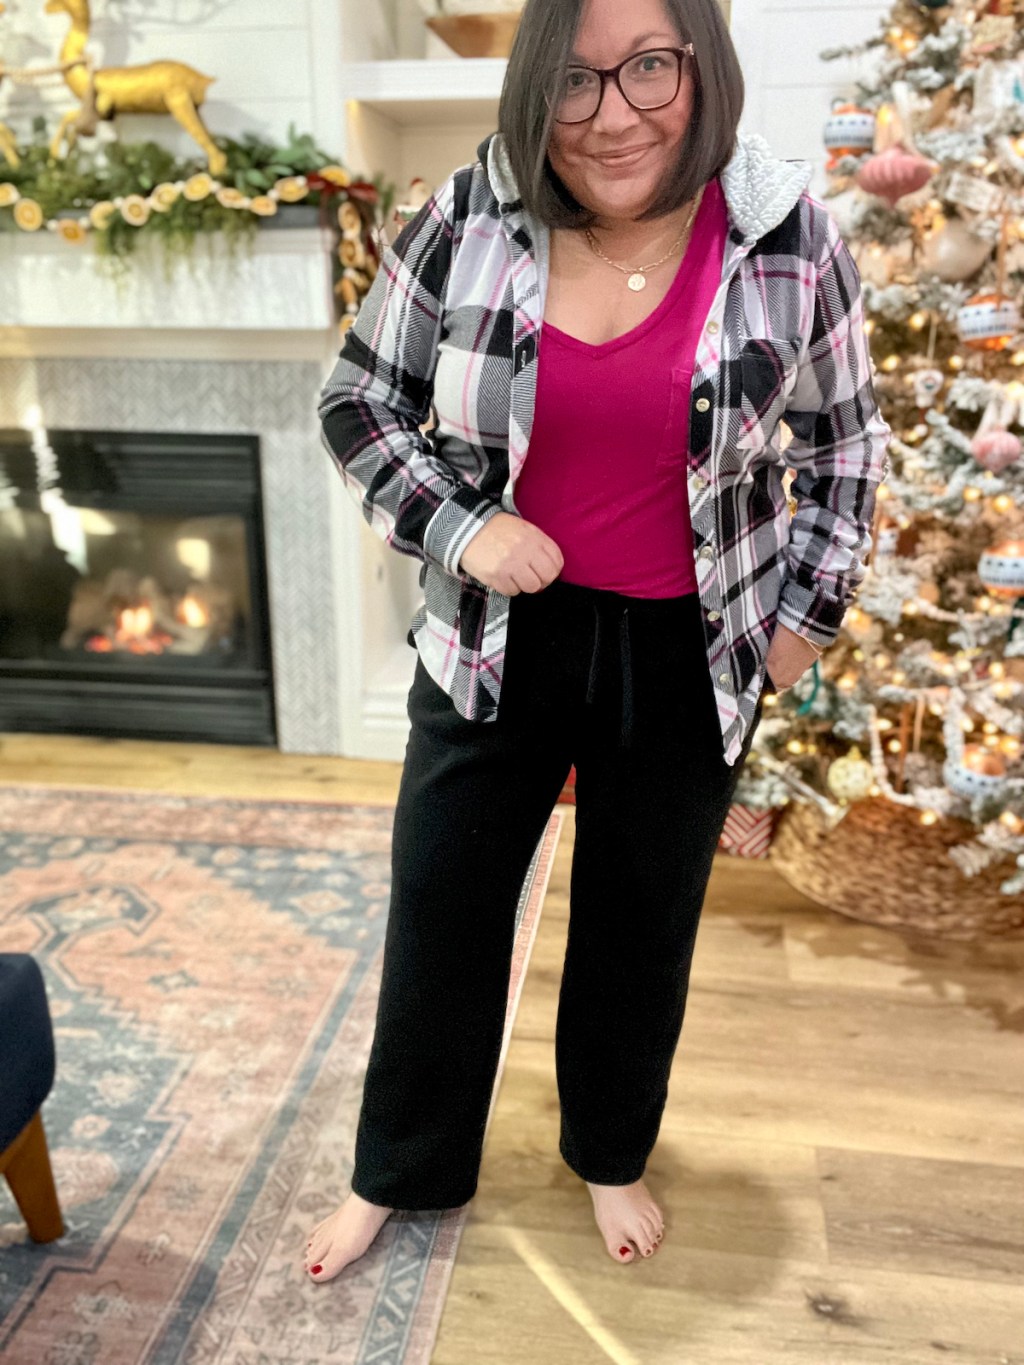 woman wearing black sweatpants standing in front of christmas tree